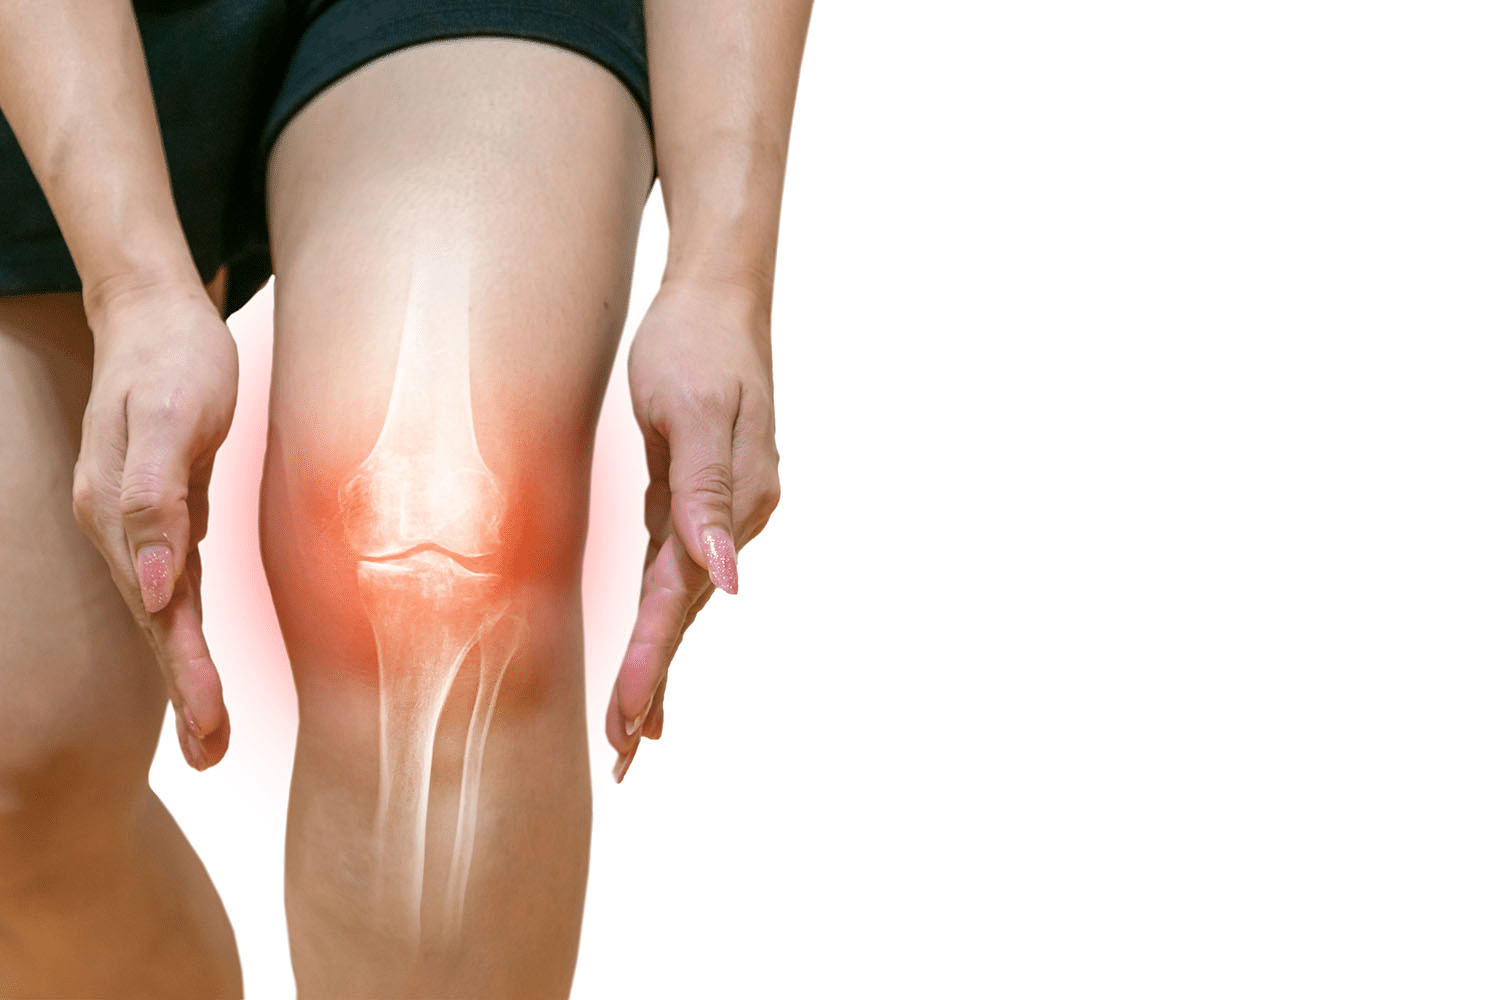 Injured tissue and knee osteoarthritis from cartilage defects may be treated with targeted stem cell injections